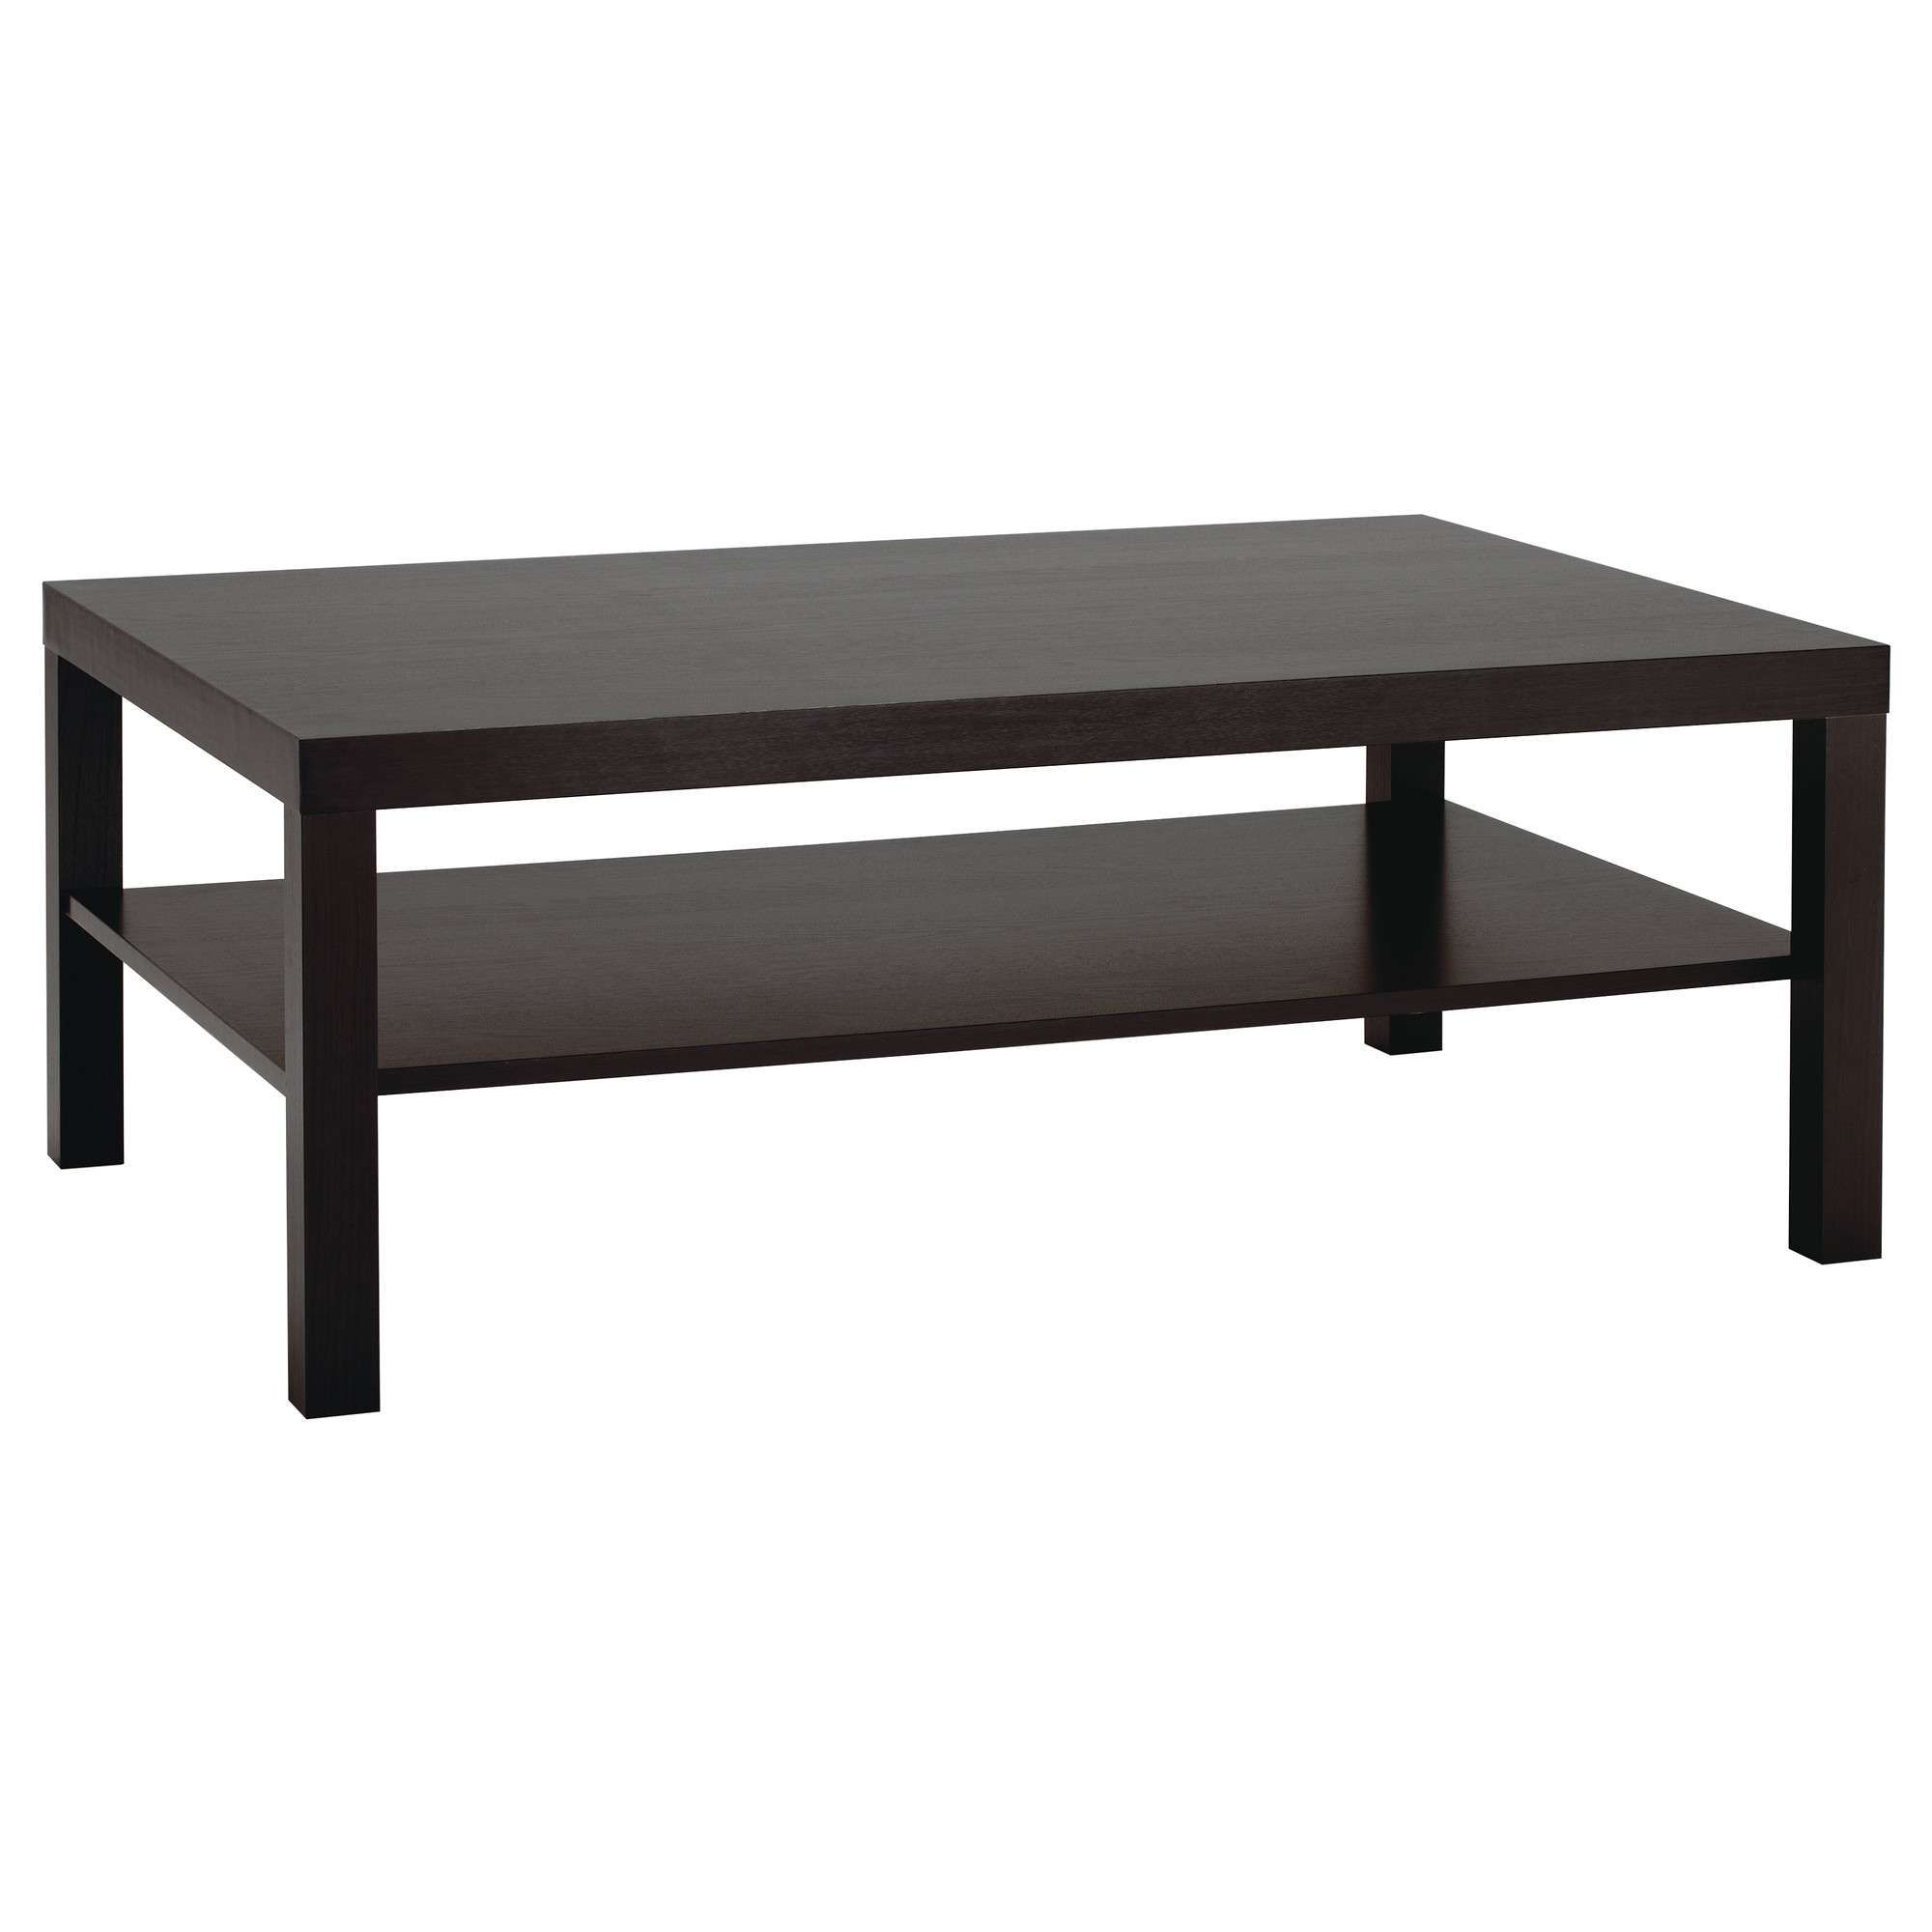 Most Up To Date Rectangular Coffee Tables Pertaining To Lack Coffee Table – Black Brown – Ikea (Gallery 15 of 20)